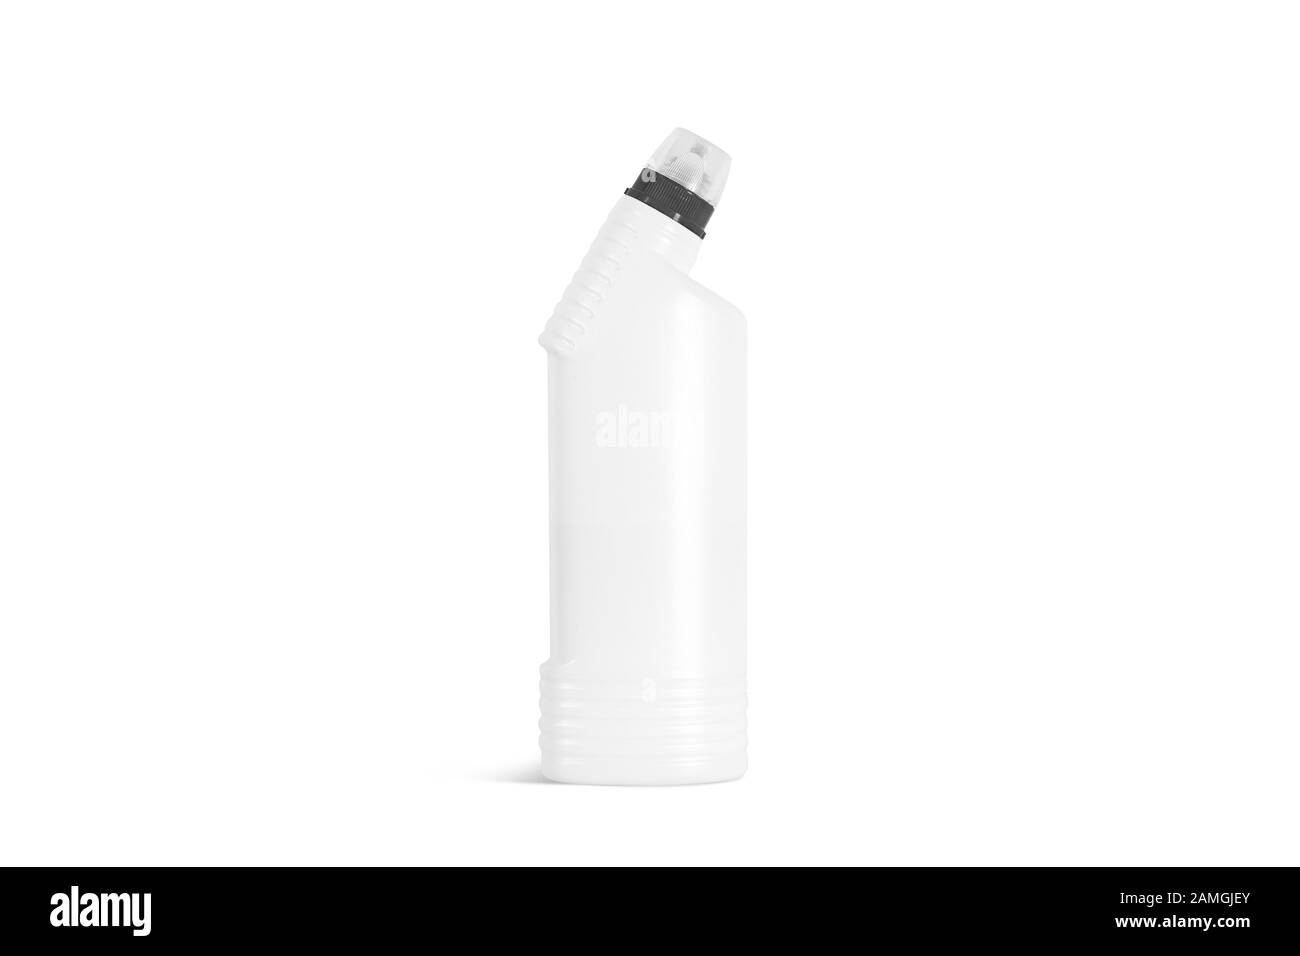 Blank white detergent bottle mock up, front view Stock Photo